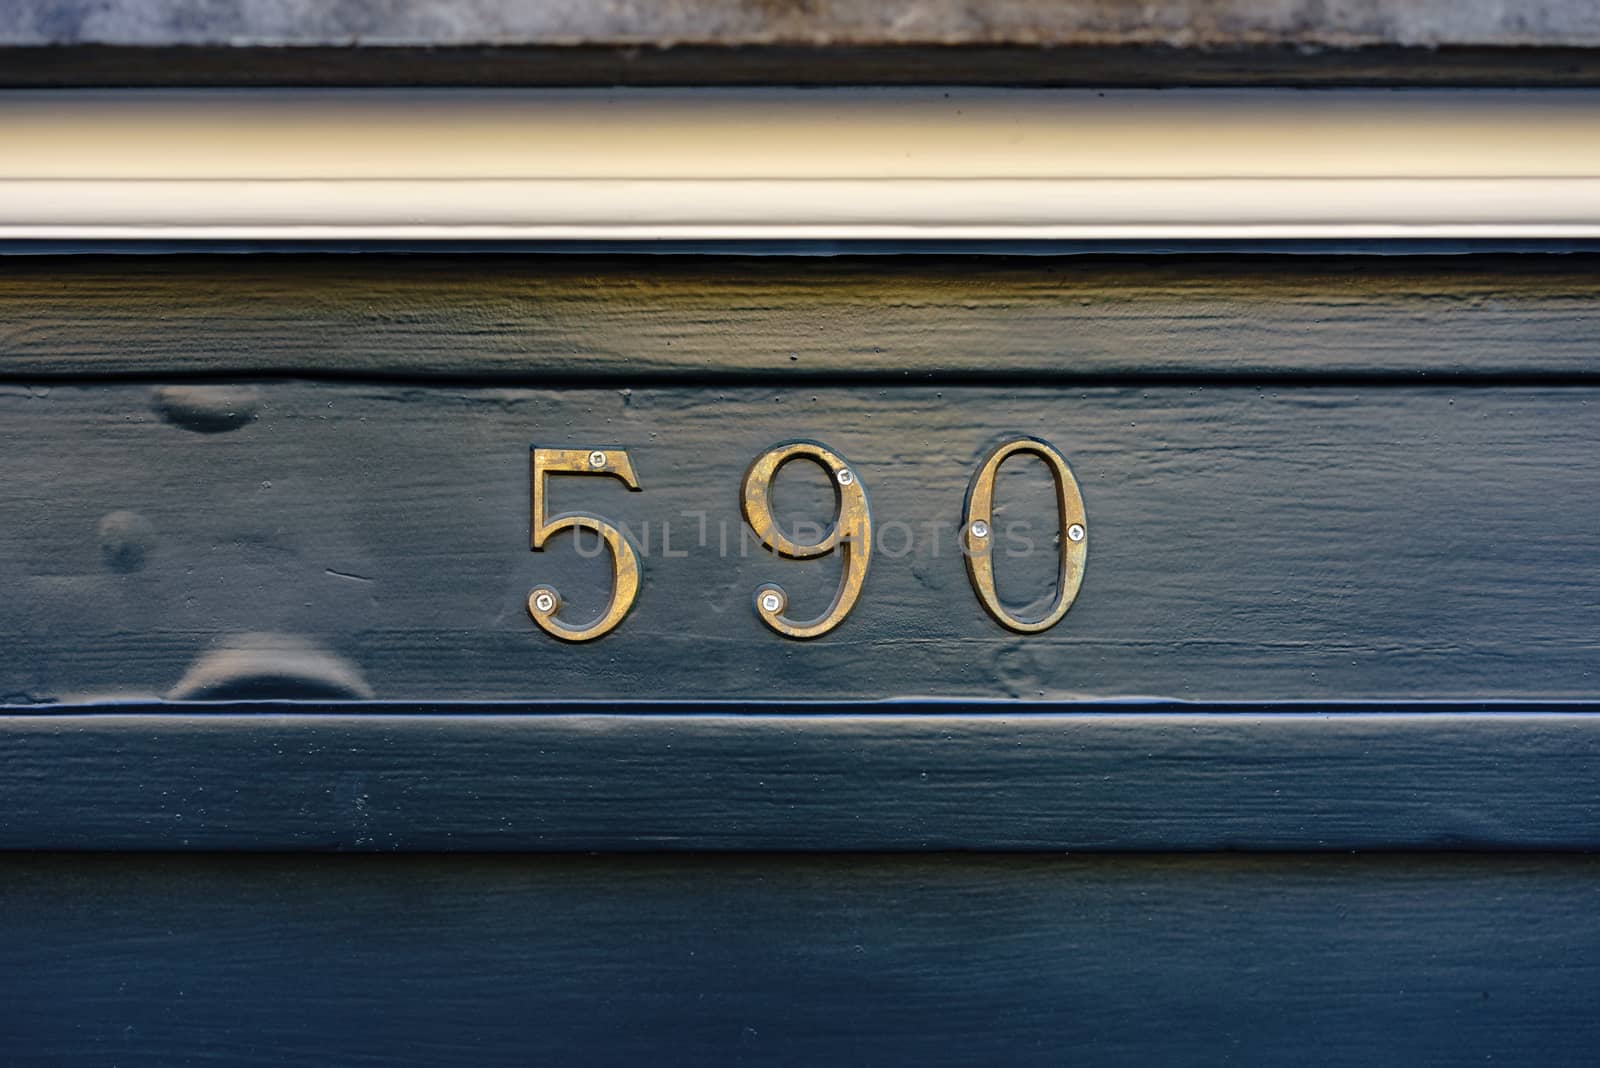 bronze house number five hundred and ninety (590).